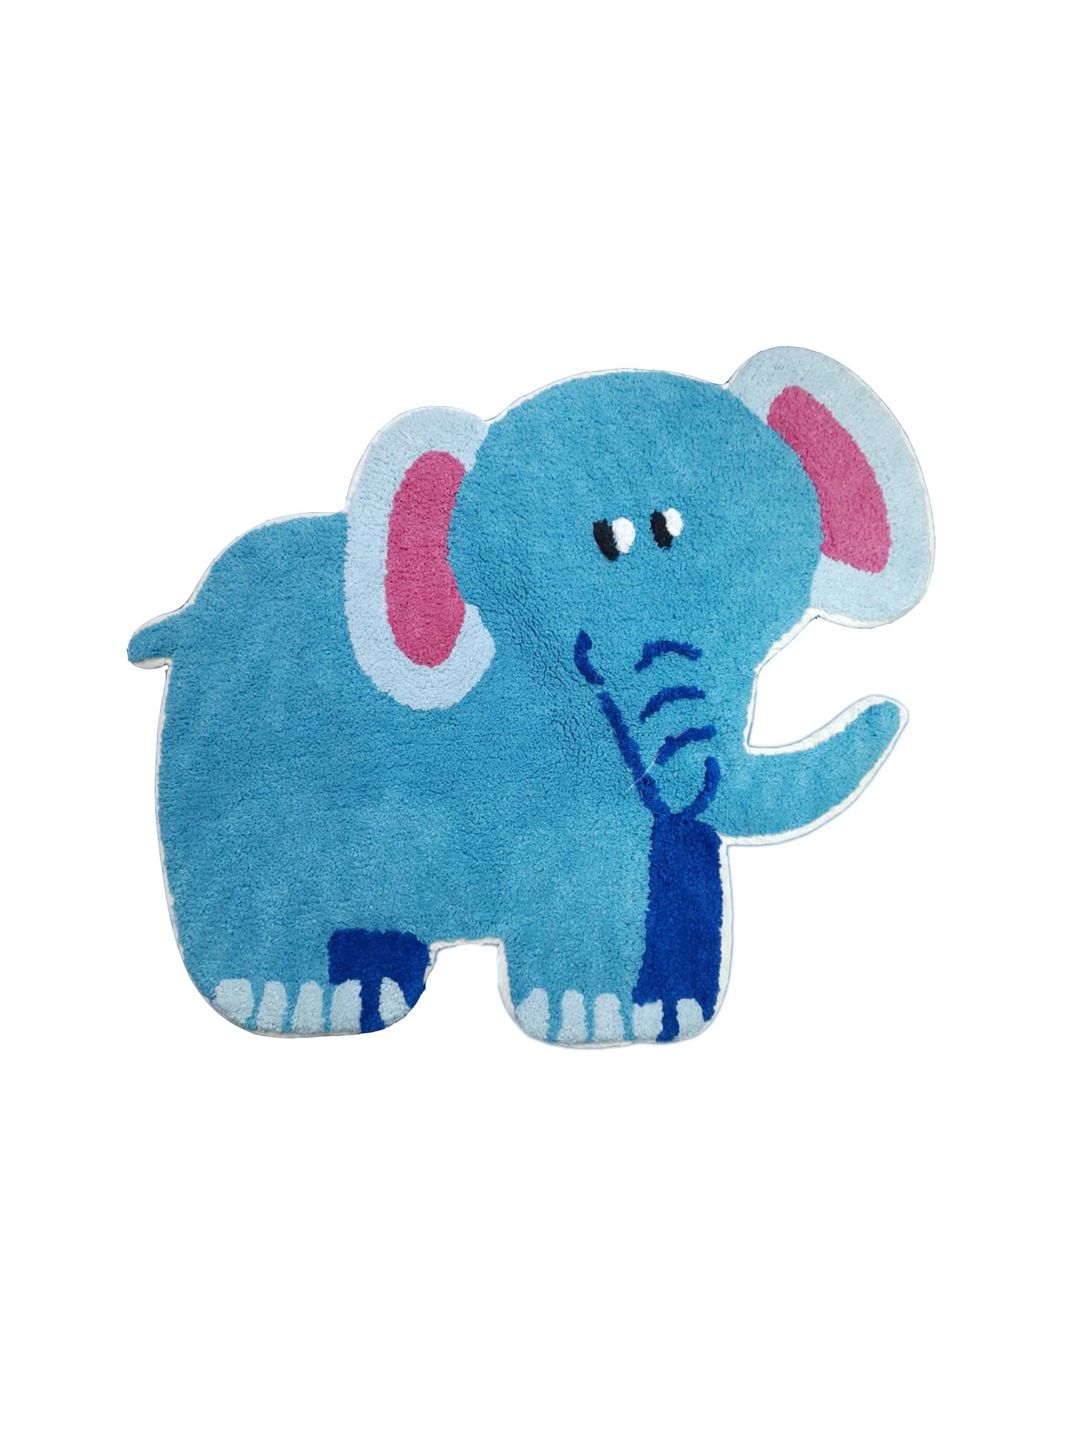 SWHF Kids Blue Elephant Shaped Rug and Mat Price in India